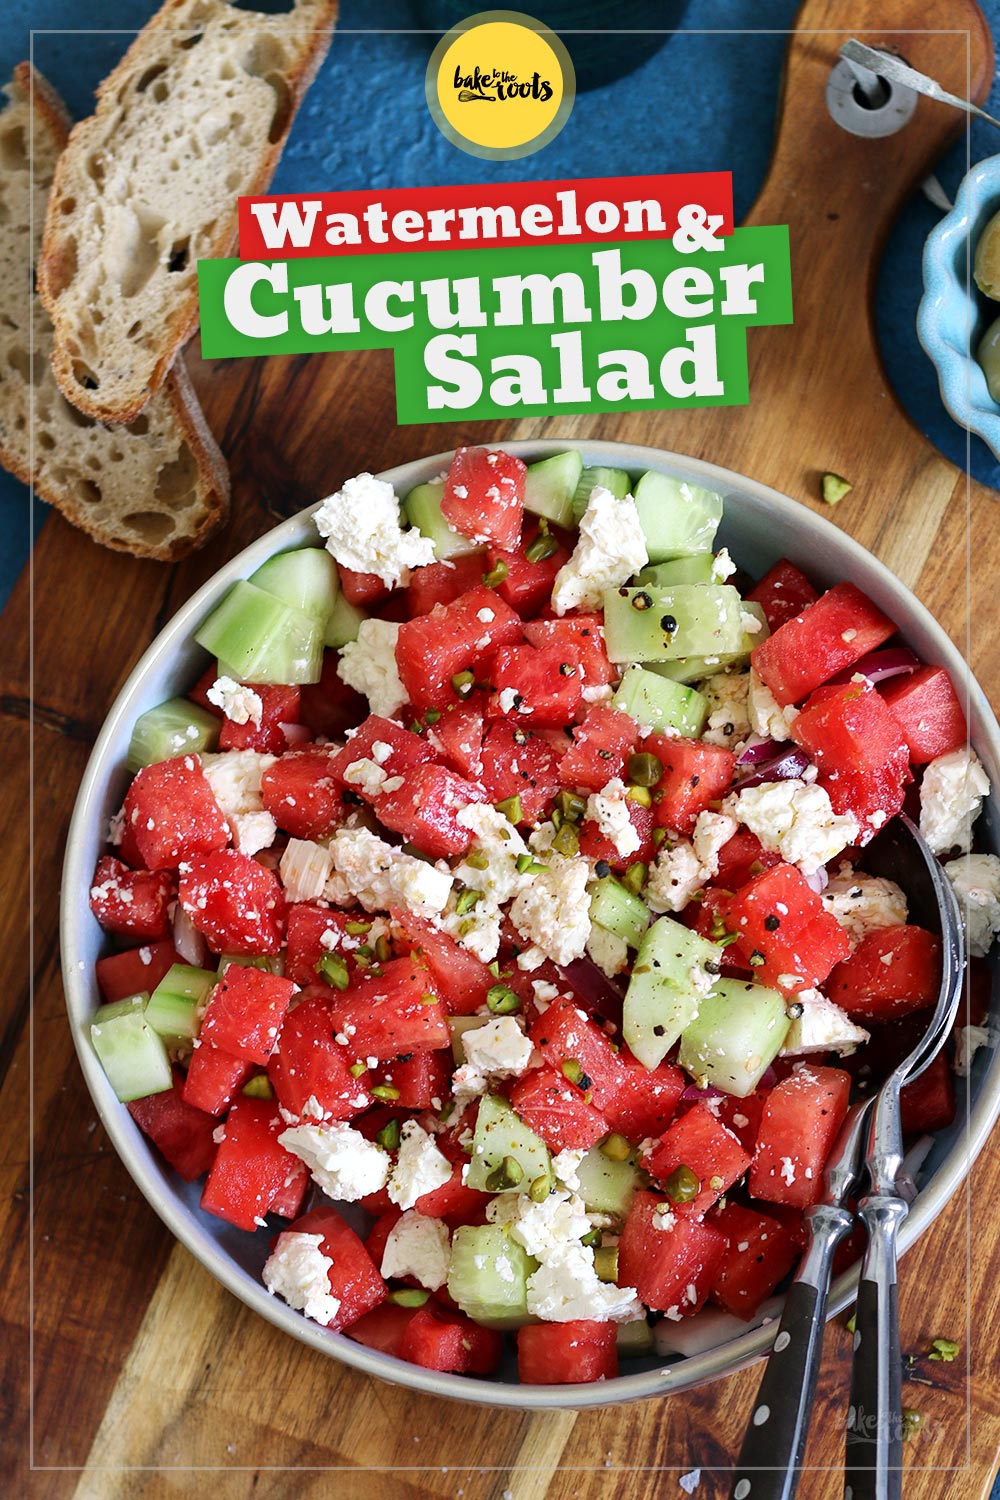 Watermelon & Cucumber Salad with Feta | Bake to the roots